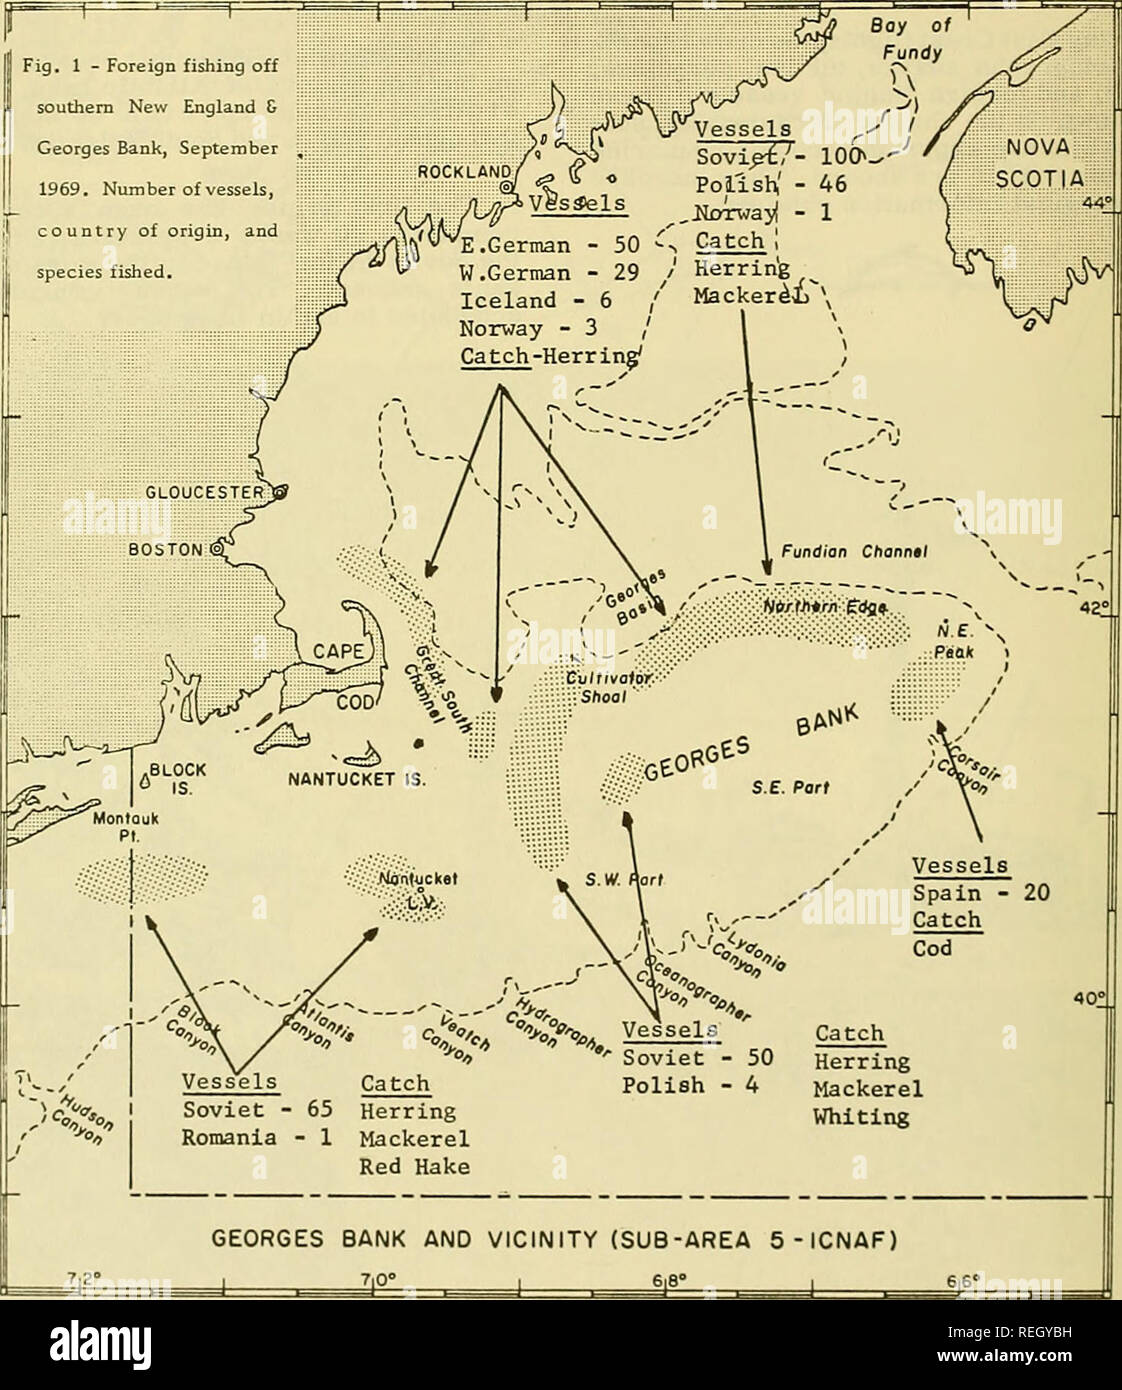 Commercial fisheries review. Fisheries; Fish trade. FOREIGN FISHING OFF  U.S., SEPTEMBER 1969 Generally good weather permitted excellent coverage of  the northwest Atlantic off New England; 340 foreign fishing and support  vessels